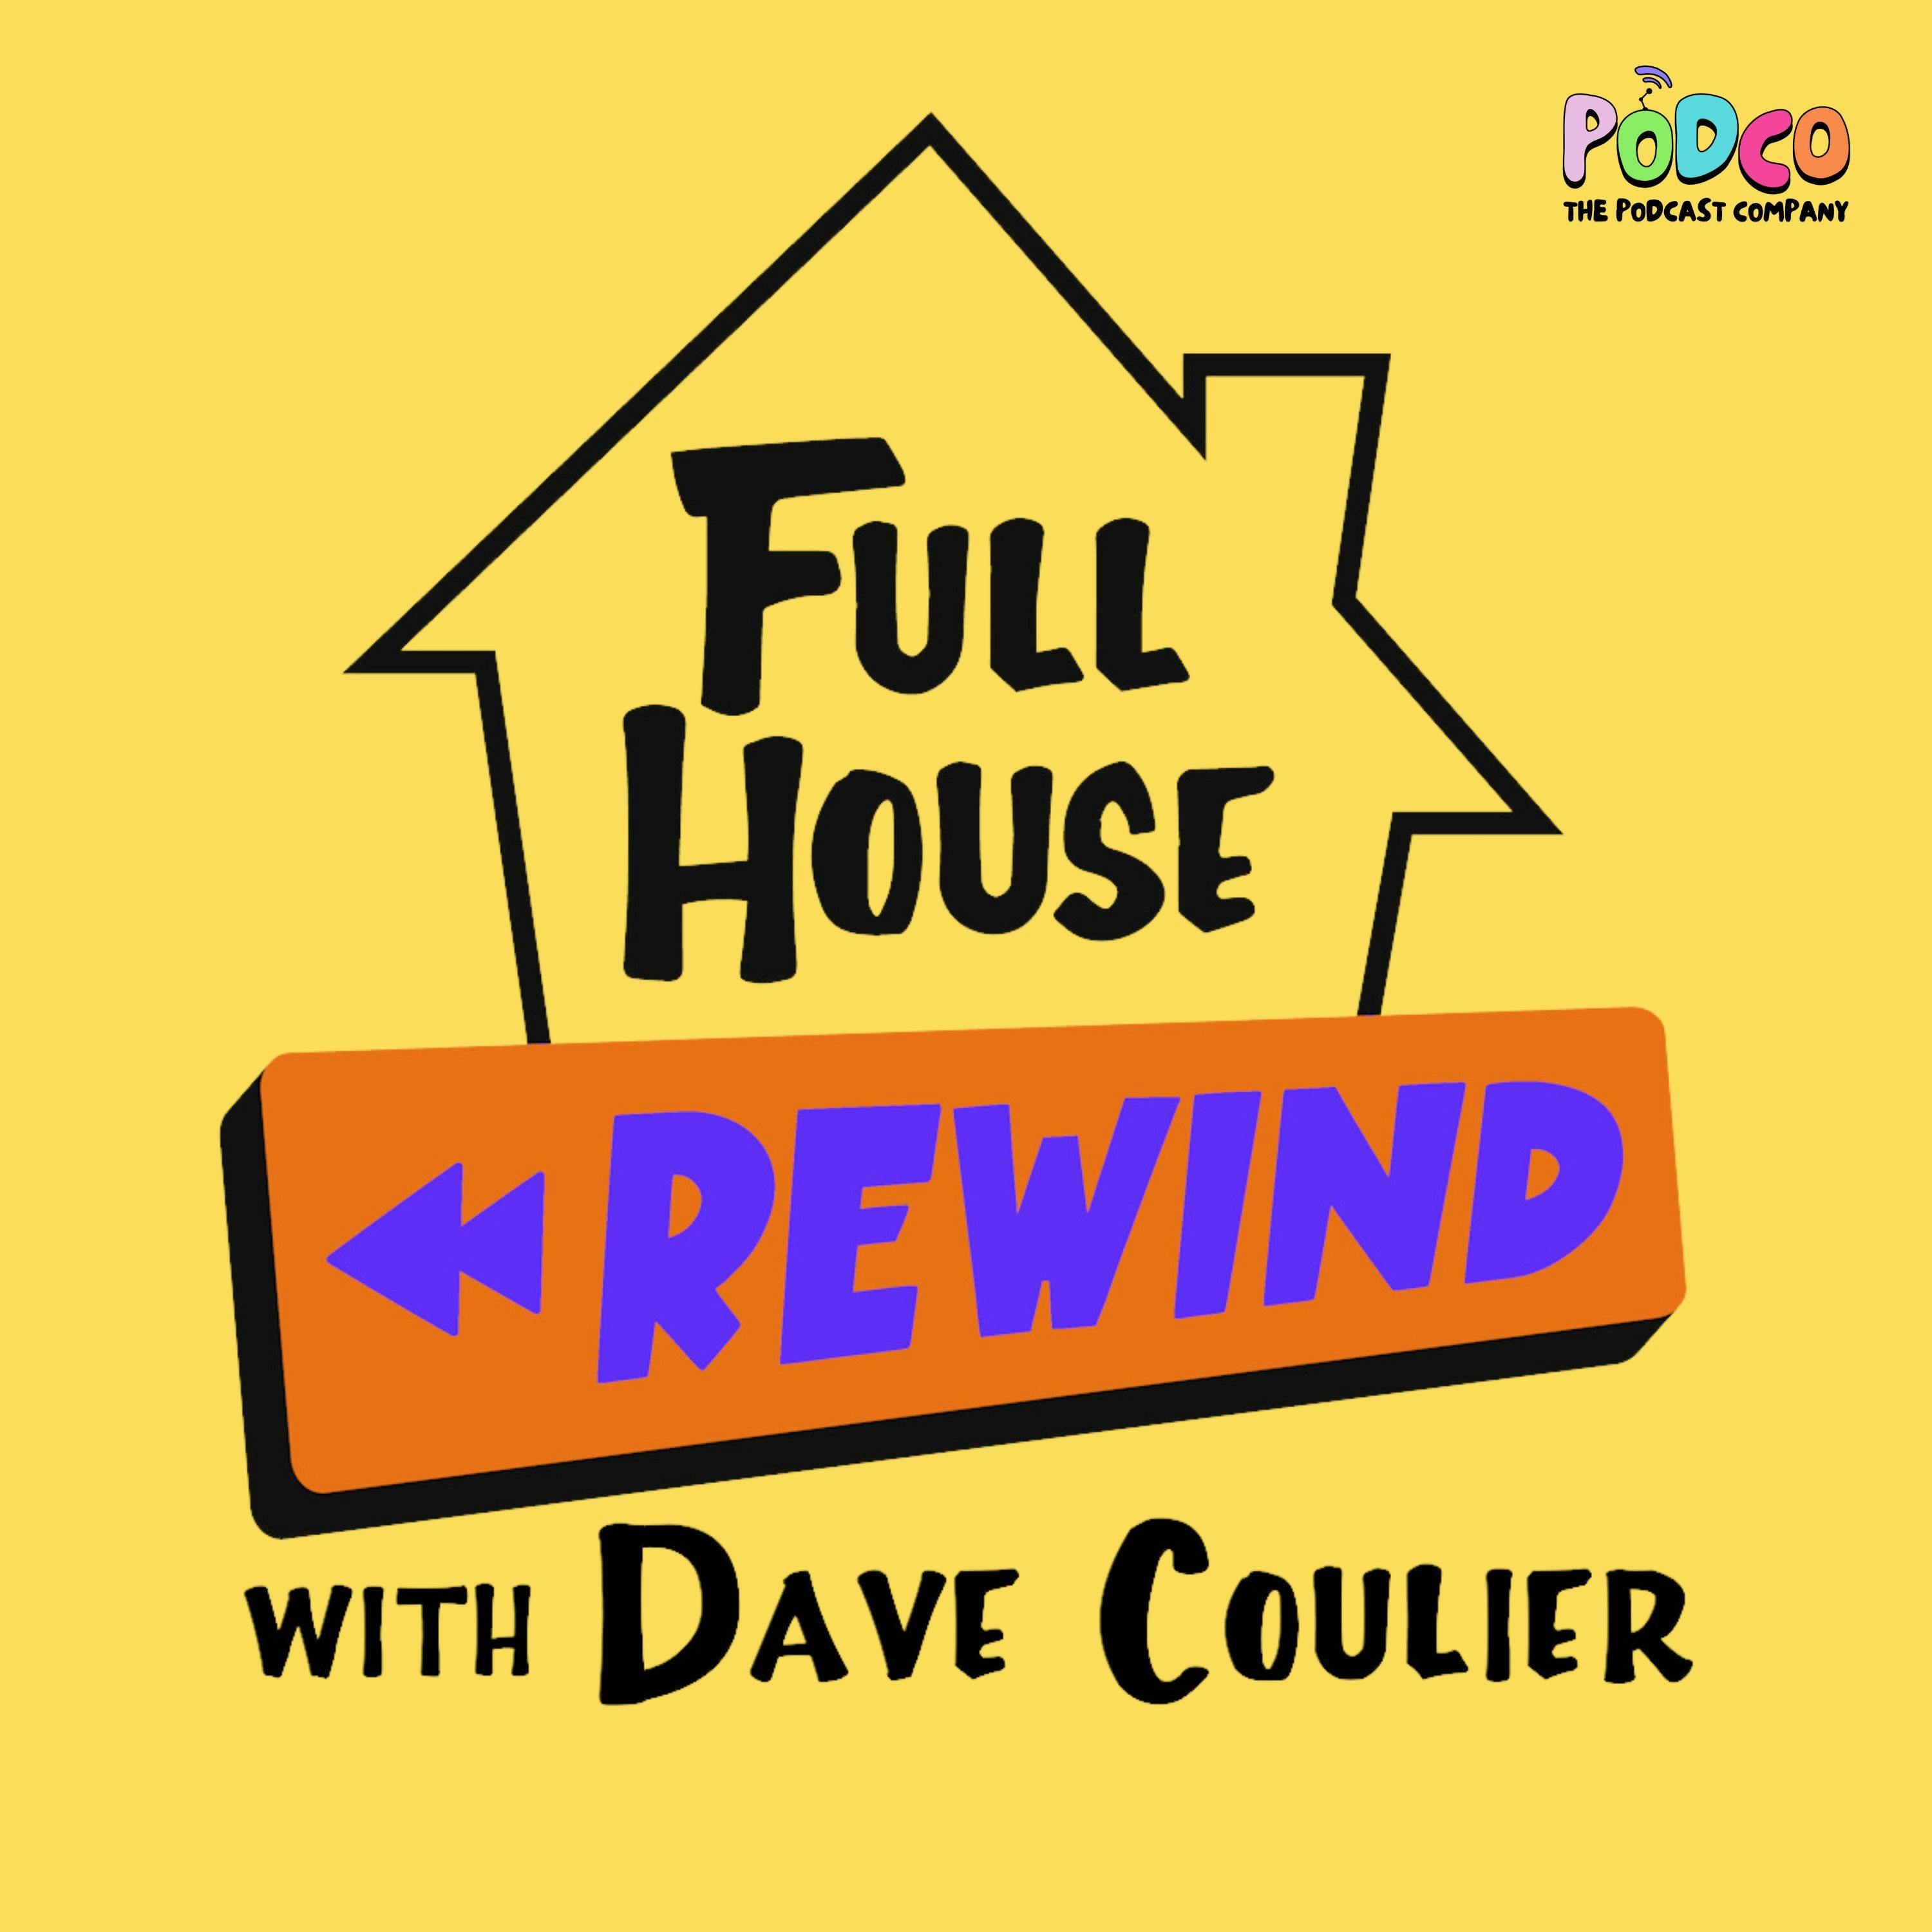 Full House Rewind podcast show image